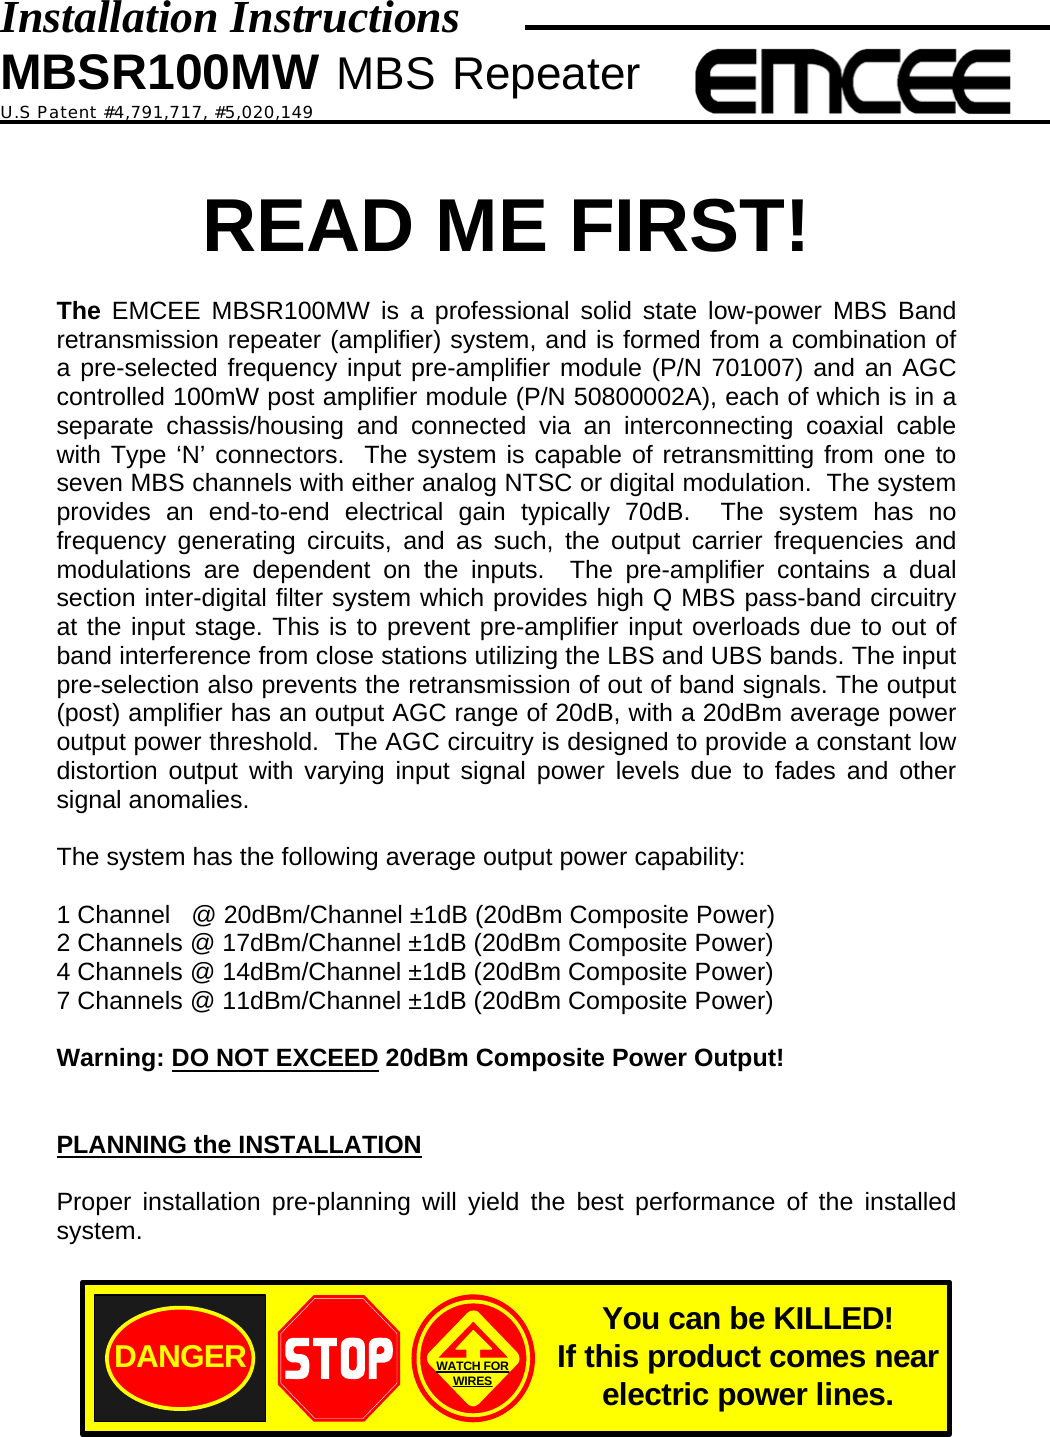 Installation Instructions MBSR100MW MBS Repeater U.S Patent #4,791,717, #5,020,149   READ ME FIRST!  The EMCEE MBSR100MW is a professional solid state low-power MBS Band retransmission repeater (amplifier) system, and is formed from a combination of a pre-selected frequency input pre-amplifier module (P/N 701007) and an AGC controlled 100mW post amplifier module (P/N 50800002A), each of which is in a separate chassis/housing and connected via an interconnecting coaxial cable with Type ‘N’ connectors.  The system is capable of retransmitting from one to seven MBS channels with either analog NTSC or digital modulation.  The system provides an end-to-end electrical gain typically 70dB.  The system has no frequency generating circuits, and as such, the output carrier frequencies and modulations are dependent on the inputs.  The pre-amplifier contains a dual section inter-digital filter system which provides high Q MBS pass-band circuitry at the input stage. This is to prevent pre-amplifier input overloads due to out of band interference from close stations utilizing the LBS and UBS bands. The input pre-selection also prevents the retransmission of out of band signals. The output (post) amplifier has an output AGC range of 20dB, with a 20dBm average power output power threshold.  The AGC circuitry is designed to provide a constant low distortion output with varying input signal power levels due to fades and other signal anomalies.  The system has the following average output power capability:  1 Channel   @ 20dBm/Channel ±1dB (20dBm Composite Power) 2 Channels @ 17dBm/Channel ±1dB (20dBm Composite Power) 4 Channels @ 14dBm/Channel ±1dB (20dBm Composite Power) 7 Channels @ 11dBm/Channel ±1dB (20dBm Composite Power)  Warning: DO NOT EXCEED 20dBm Composite Power Output!   PLANNING the INSTALLATION  Proper installation pre-planning will yield the best performance of the installed system.  DANGER WATCH FORWIRESYou can be KILLED!If this product comes near electric power lines.